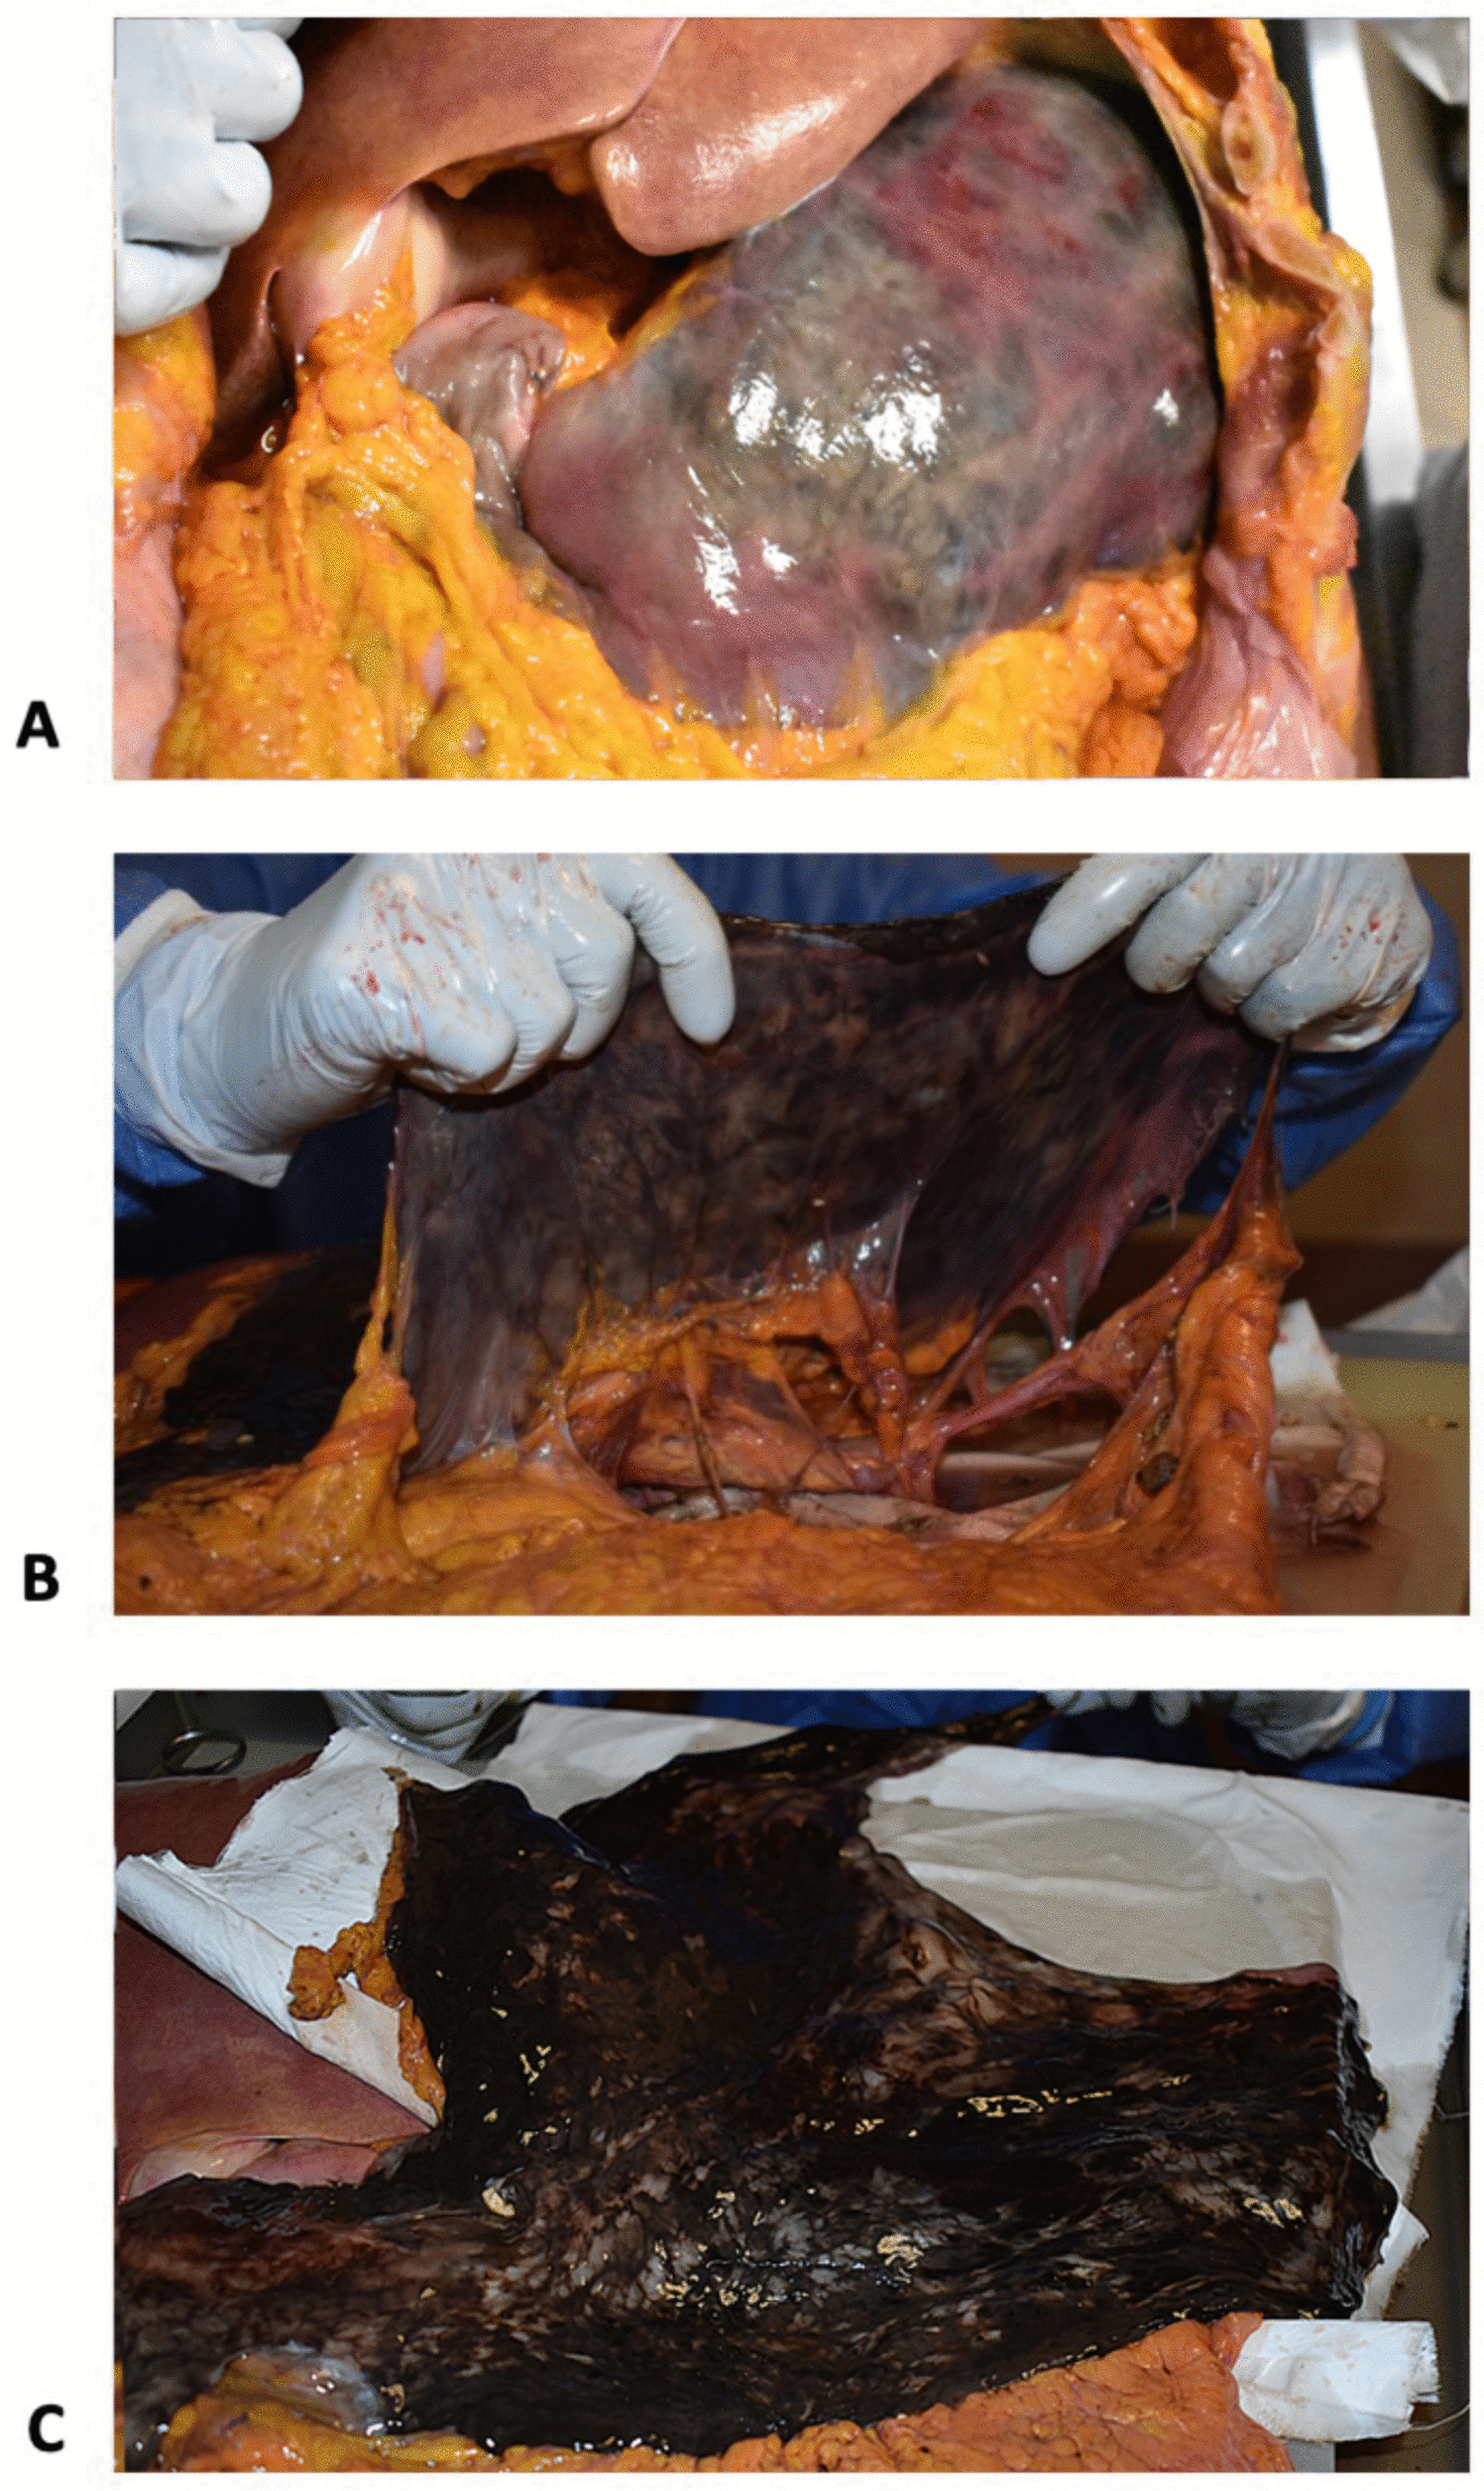 Gastric ischemia as an under-reported cause of death in older people